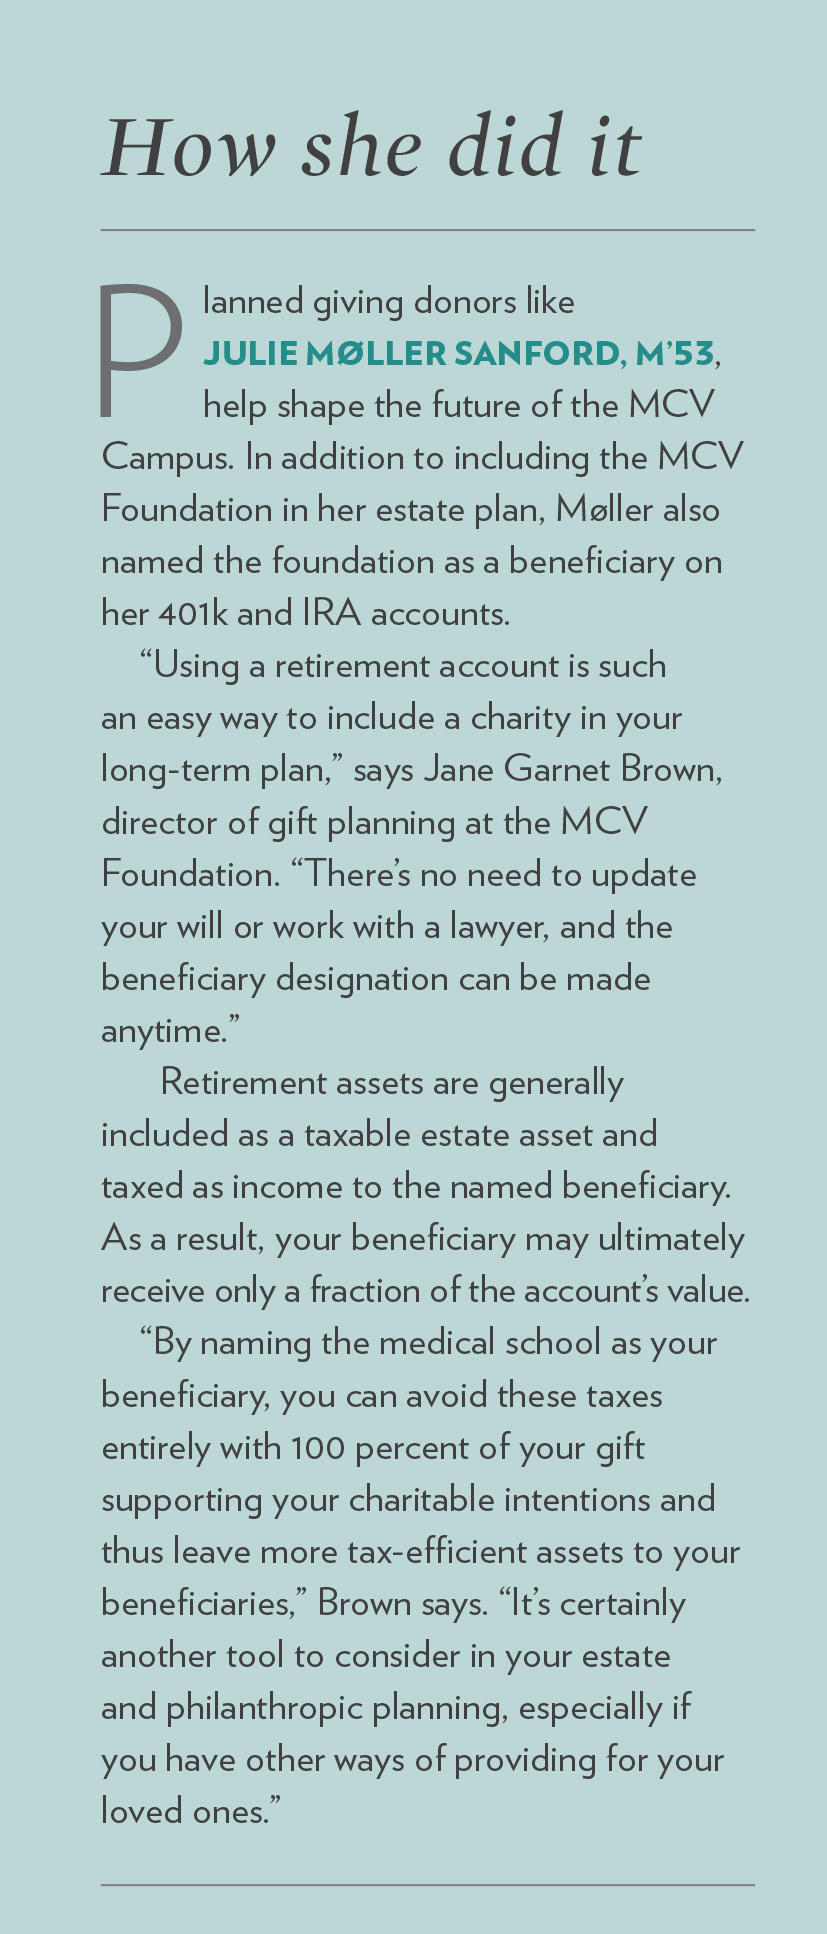 Planned giving explanatio. Møller also named the foundation as a beneficiary on her 401k and IRA accounts.